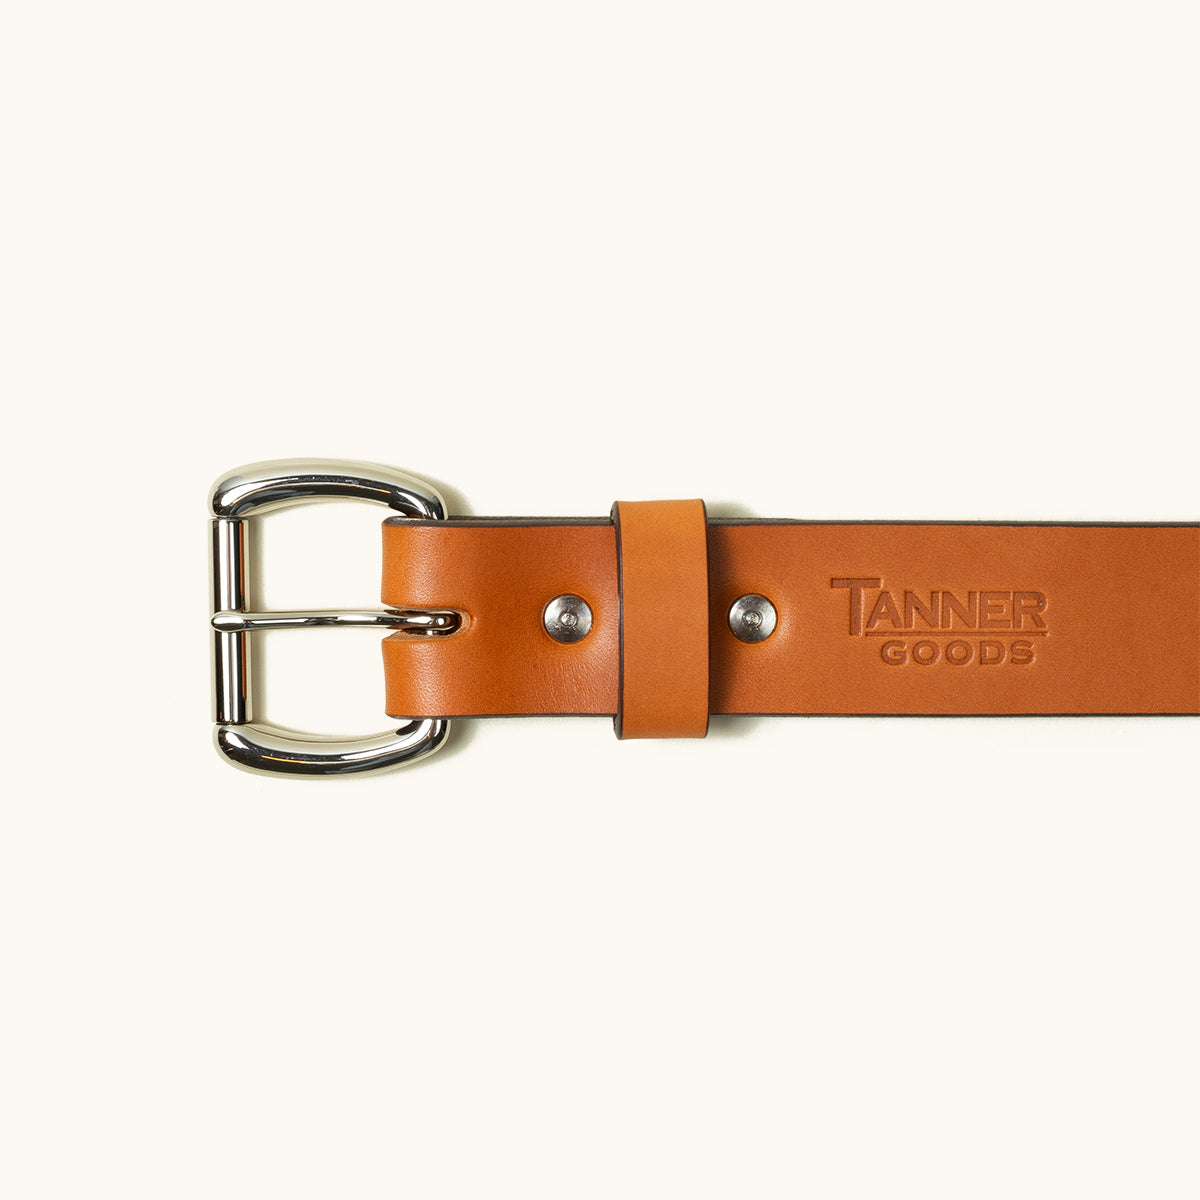 The top half of a Saddle Tan Standard belt showing a stainless roller ball buckle and Tanner Goods logo stamped into the belt.